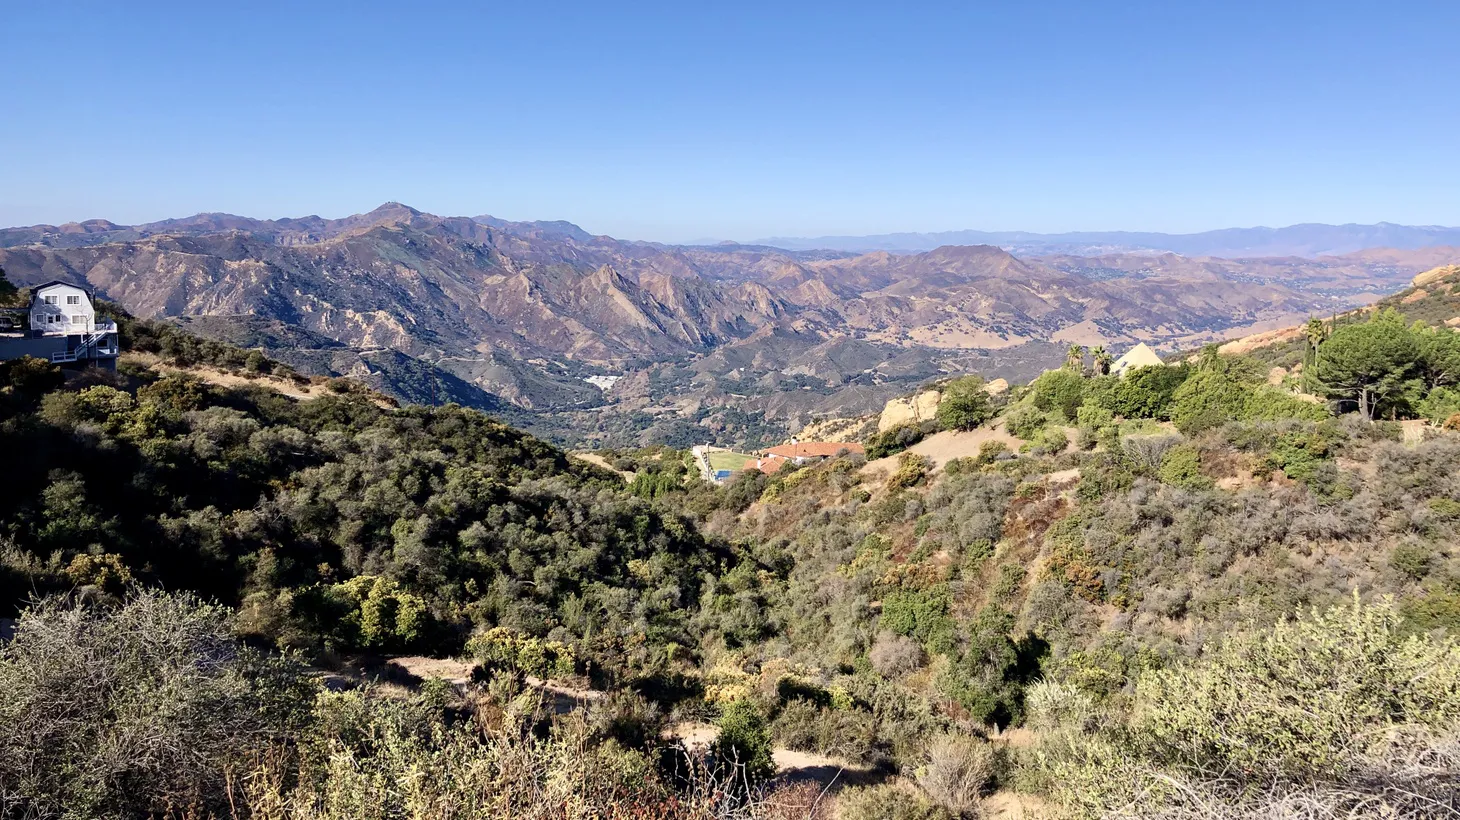 Malibu hills are seen from Piuma Road. The city is a mix of upscale and rural homes. The Malibu City Council is pursuing a plan to reserve shelter beds outside city limits and offer unhoused people transportation to that location.